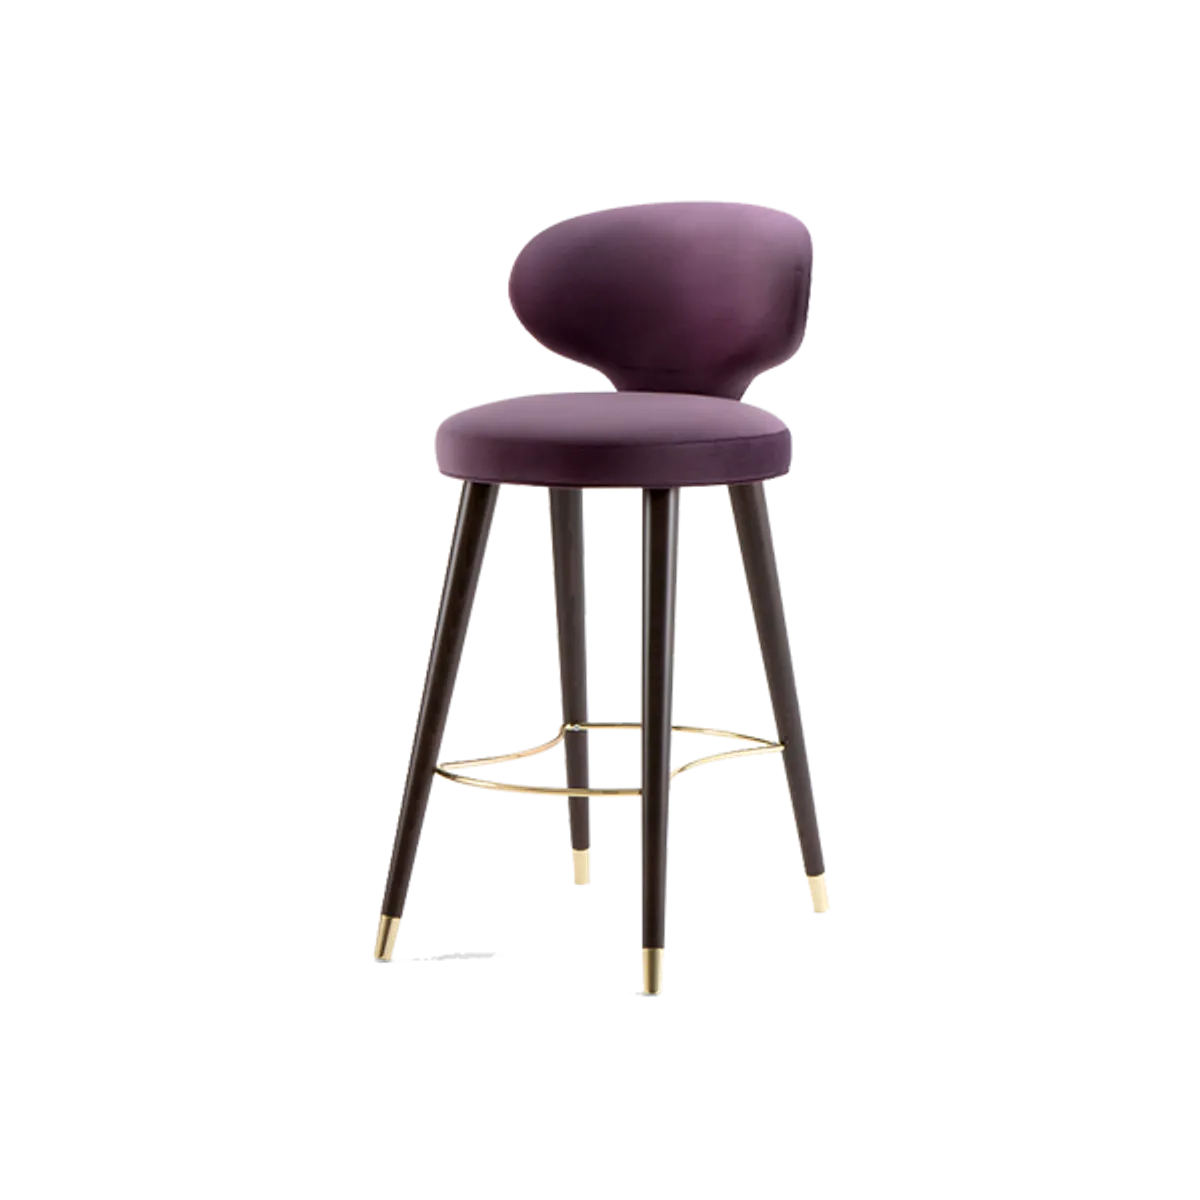 Web Sylvia Bar Stool Purple Upholstery And Wooden Legs Hotel Furniture By Insideoutcontracts